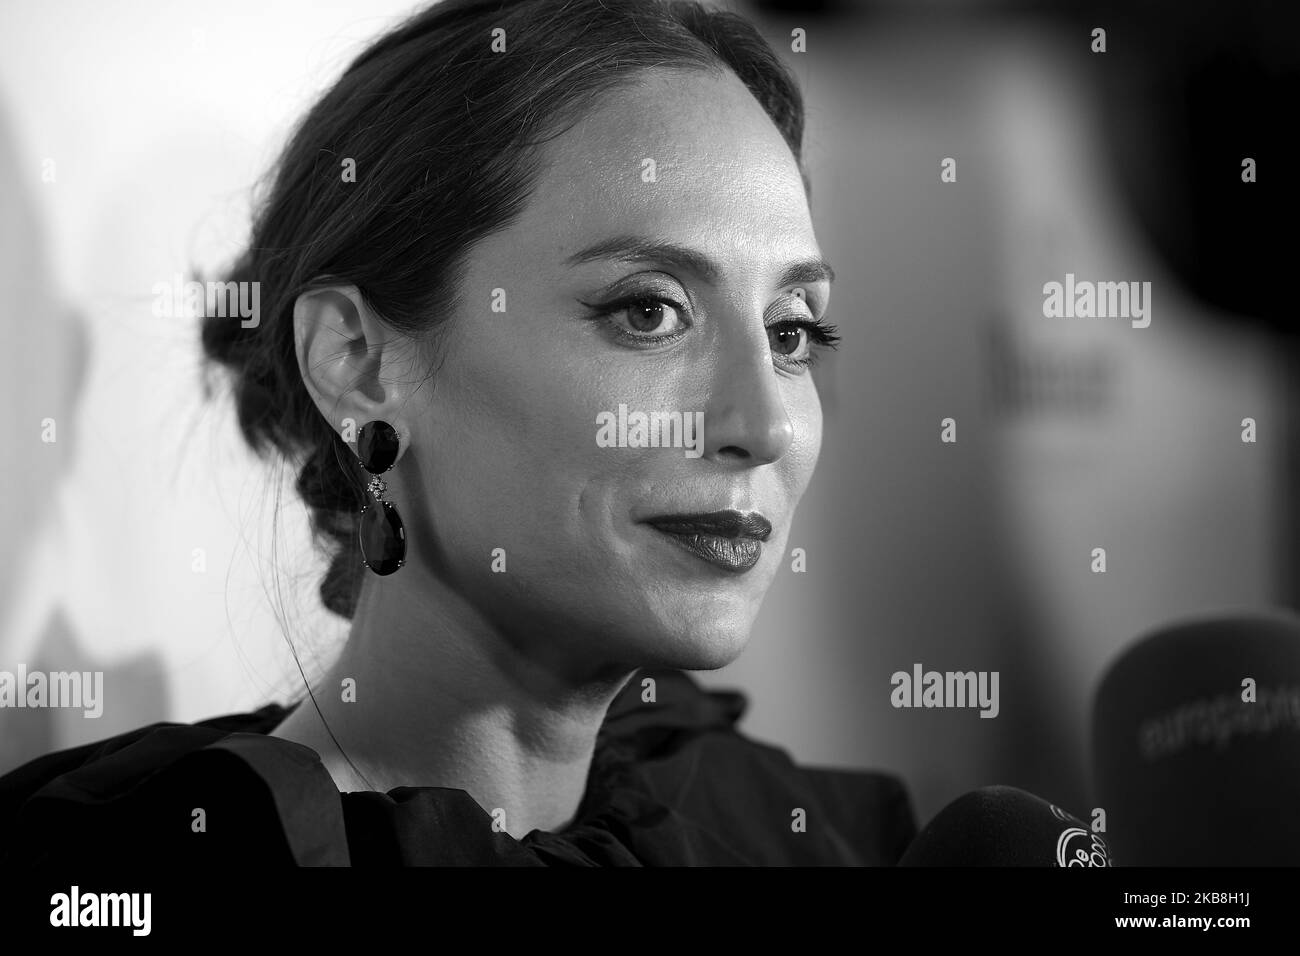 (EDITOR'S NOTE: Image has been converted to black and white) Tamara Falco attends the 'Ruinart Rose Market' at The Sibarist in Madrid, Spain on Oct 17, 2019 (Photo by Carlos Dafonte/NurPhoto) Stock Photo